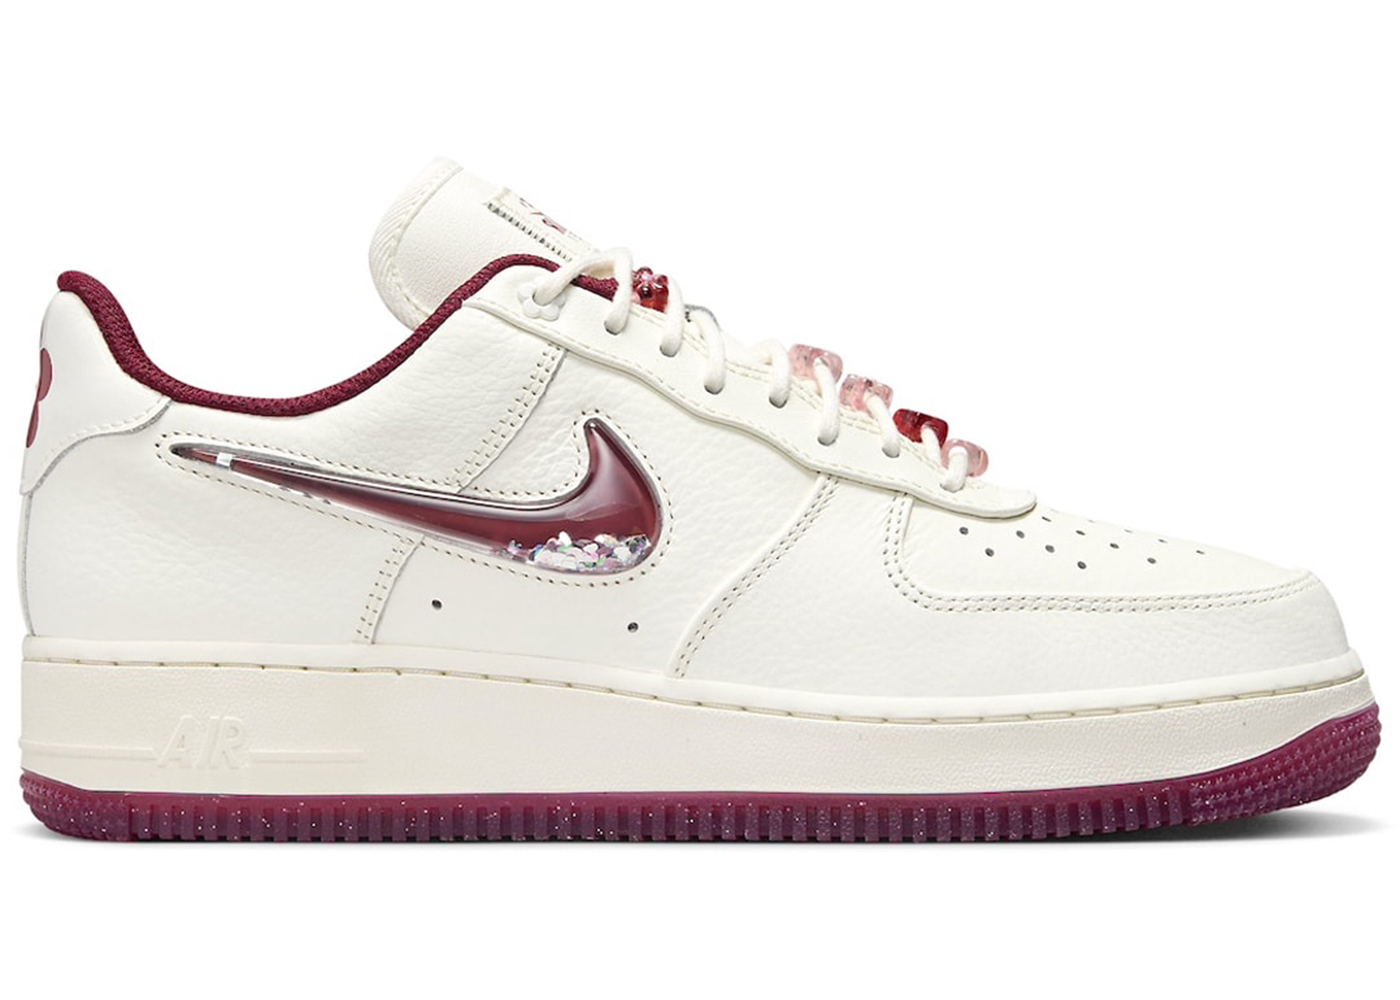 Nike Air Force 1 Low 07 Valentines Day (2007) (Women's)